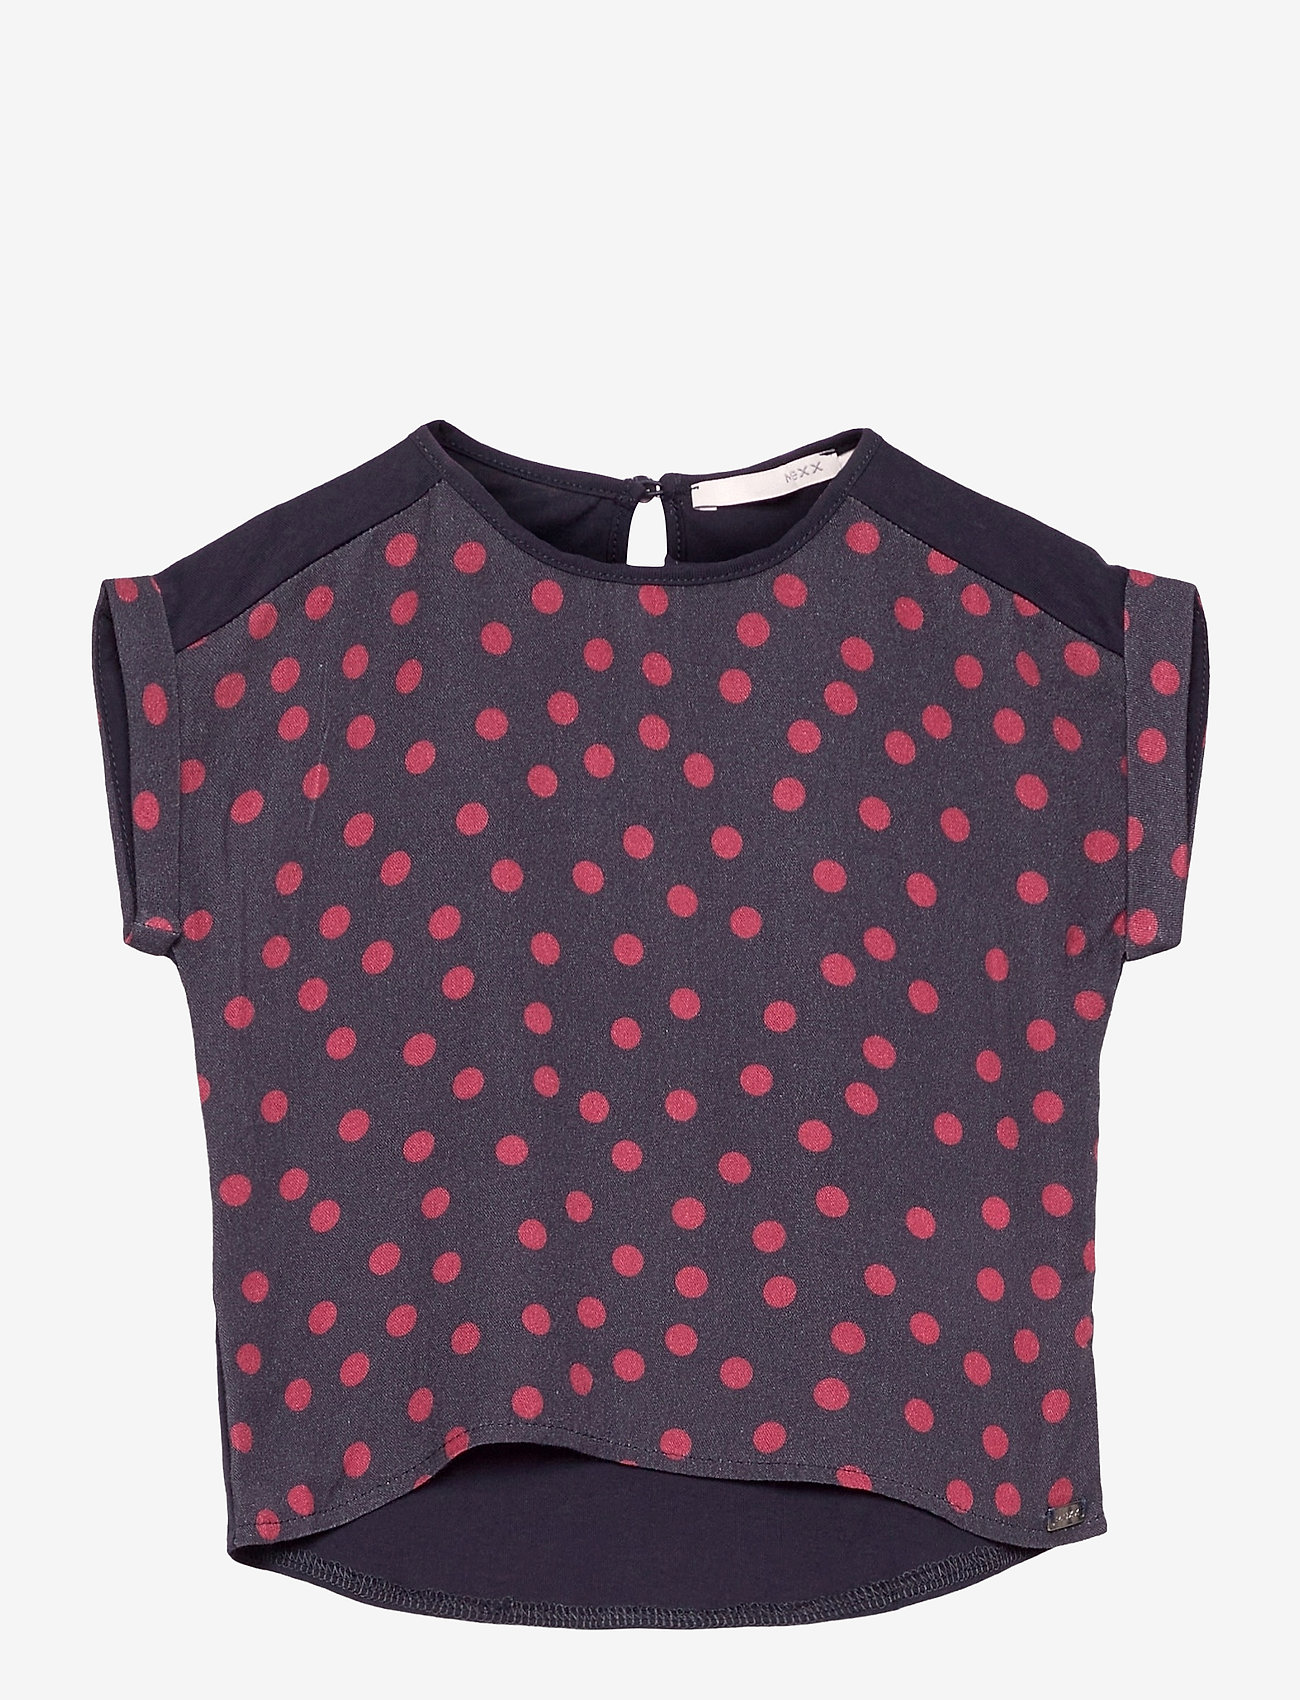 Mexx - Blouse - sommerkupp - dotted - 0